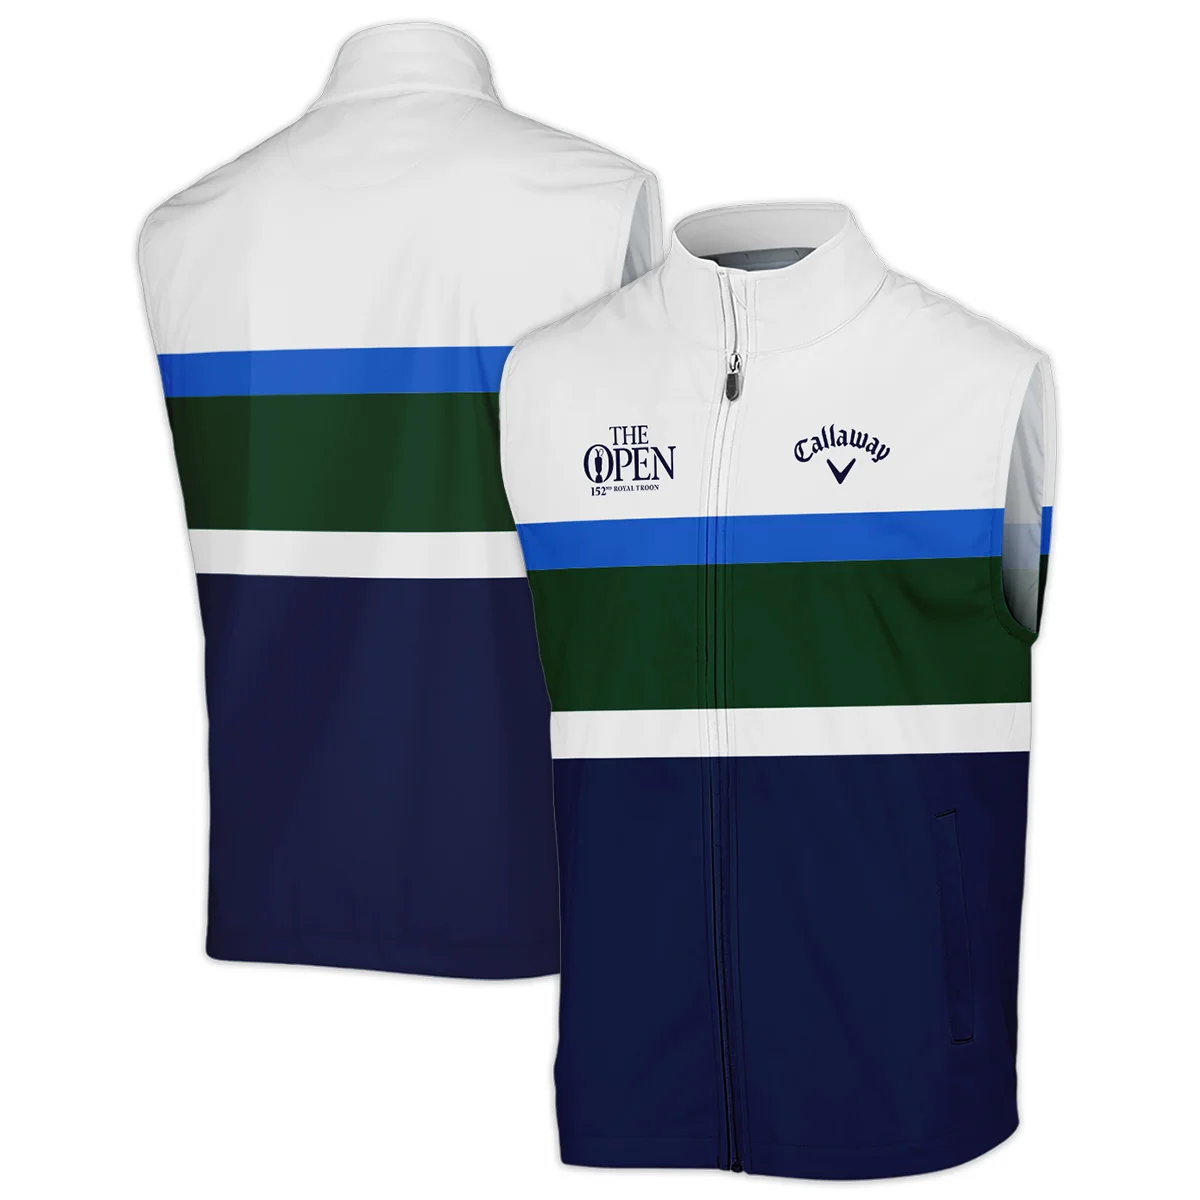 White Blue Green Background Callaway 152nd Open Championship Performance T-Shirt All Over Prints HOTOP270624A01CLWTS